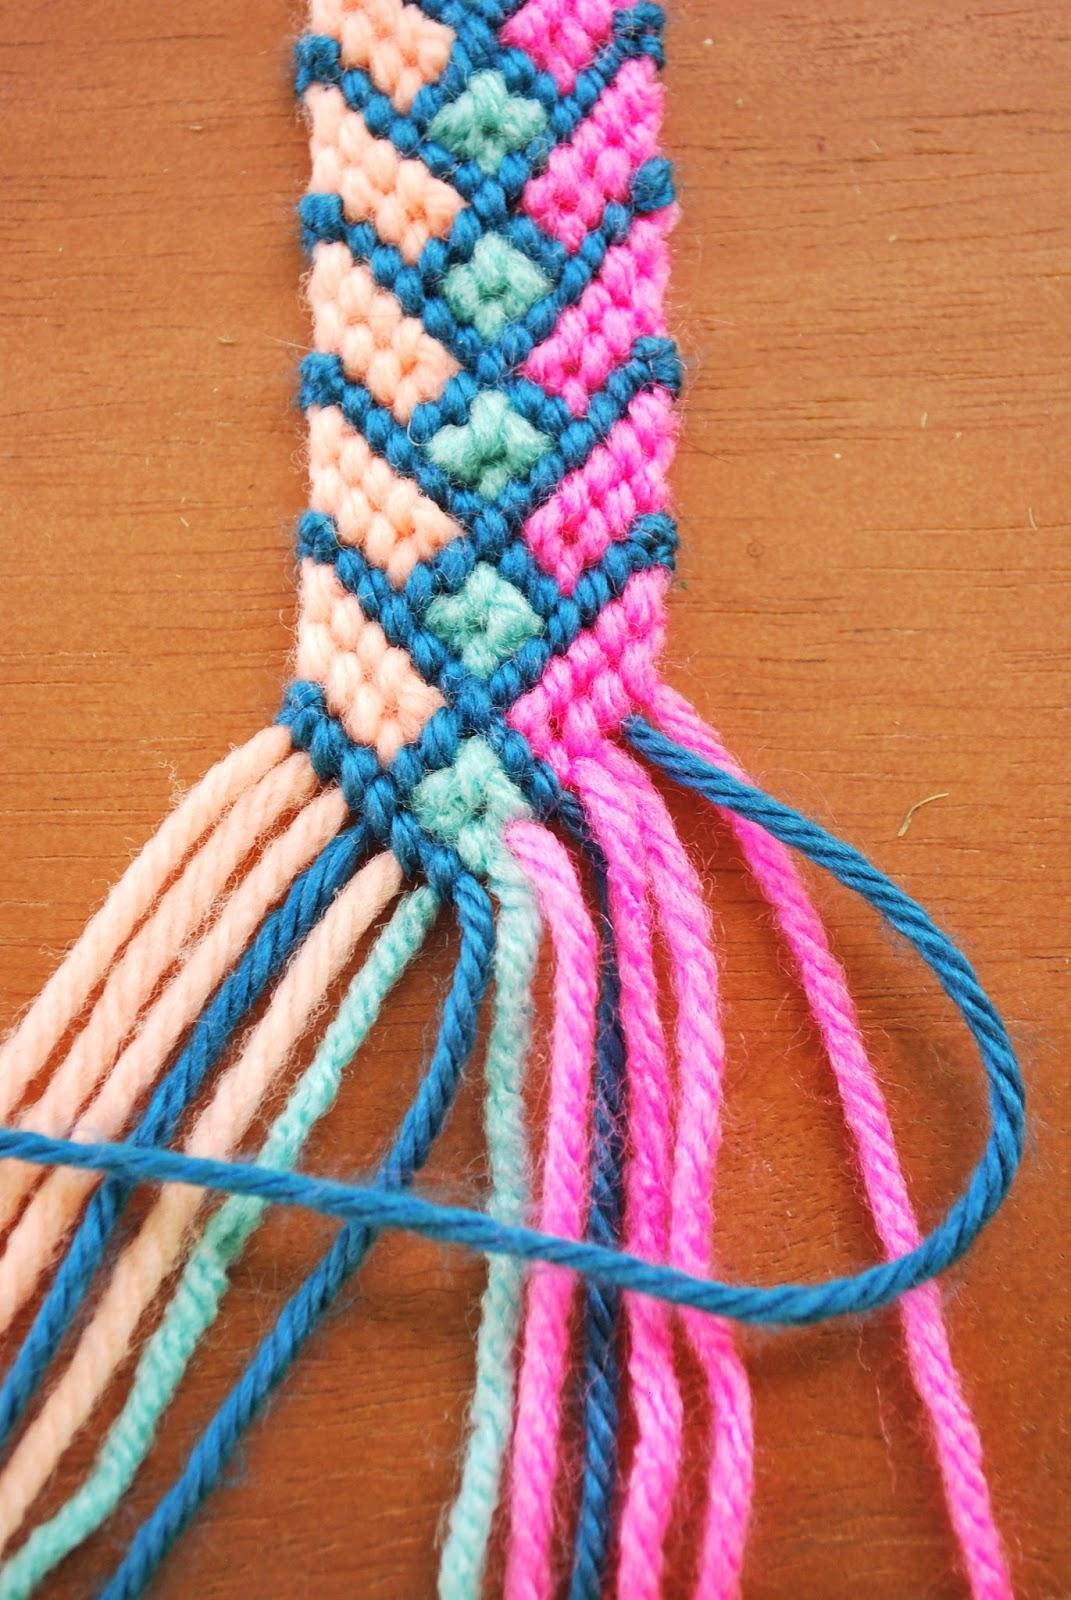 Bracelet Patterns With Embroidery Floss Diy The Crazy Complicated Friendship Bracelet